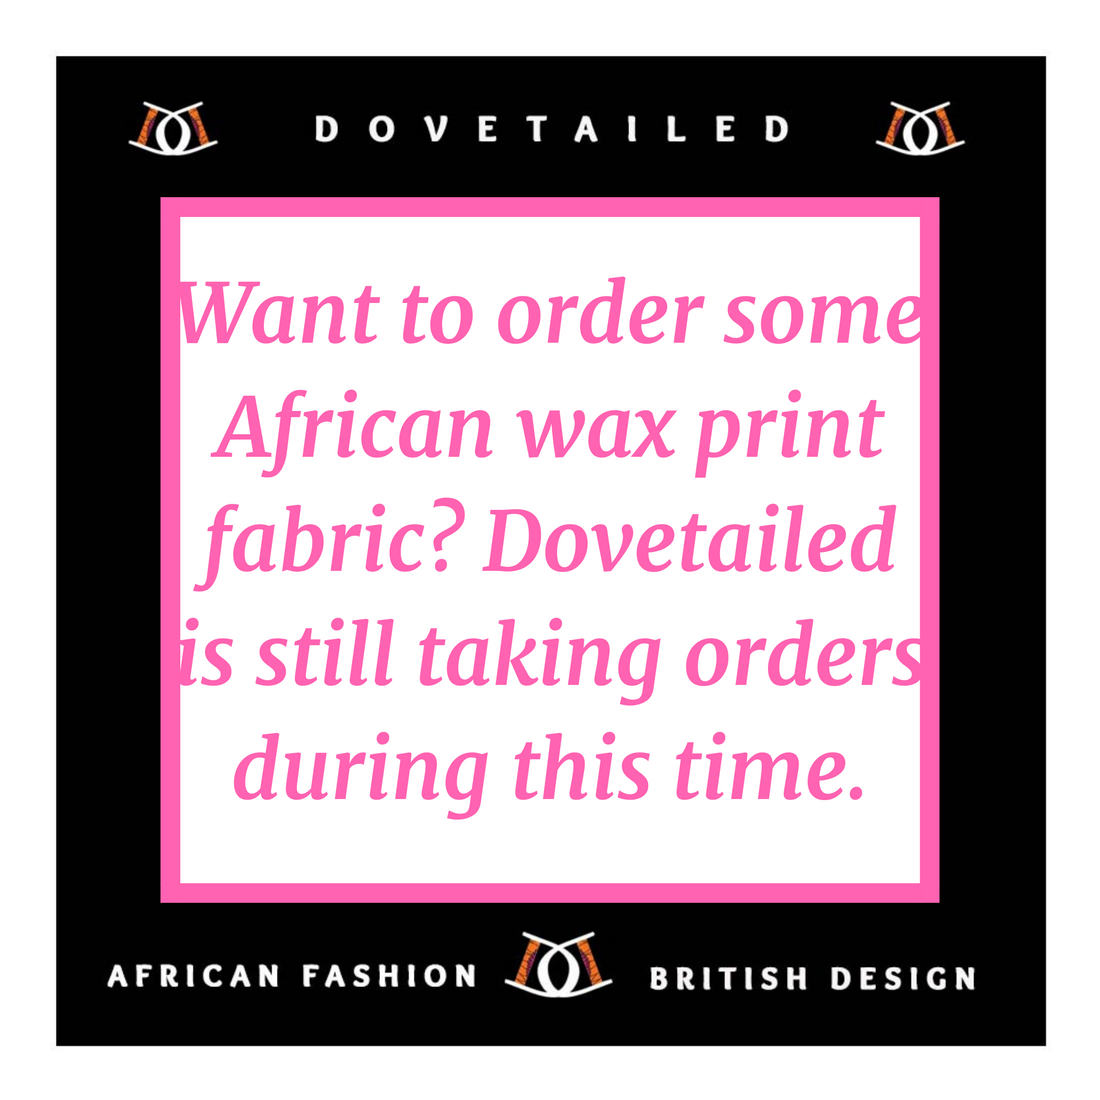 Want to order some beautiful African wax print fabrics? Dovetailed is still taking orders. ✂️